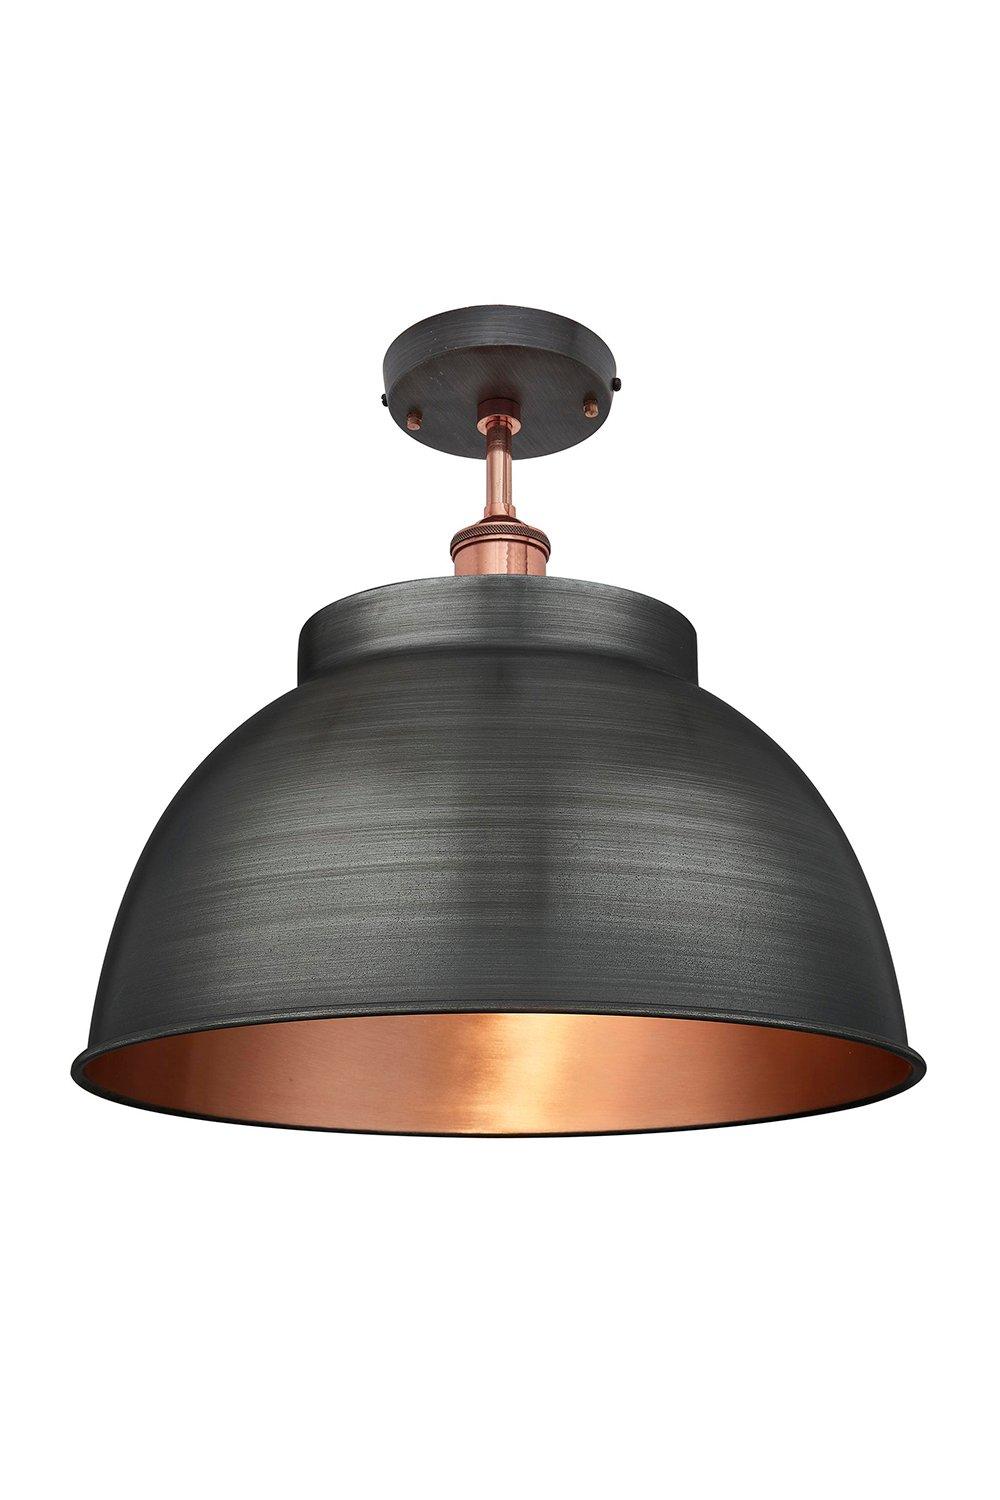 Brooklyn Dome Flush Mount, 17 Inch, Pewter & Copper, Copper Holder